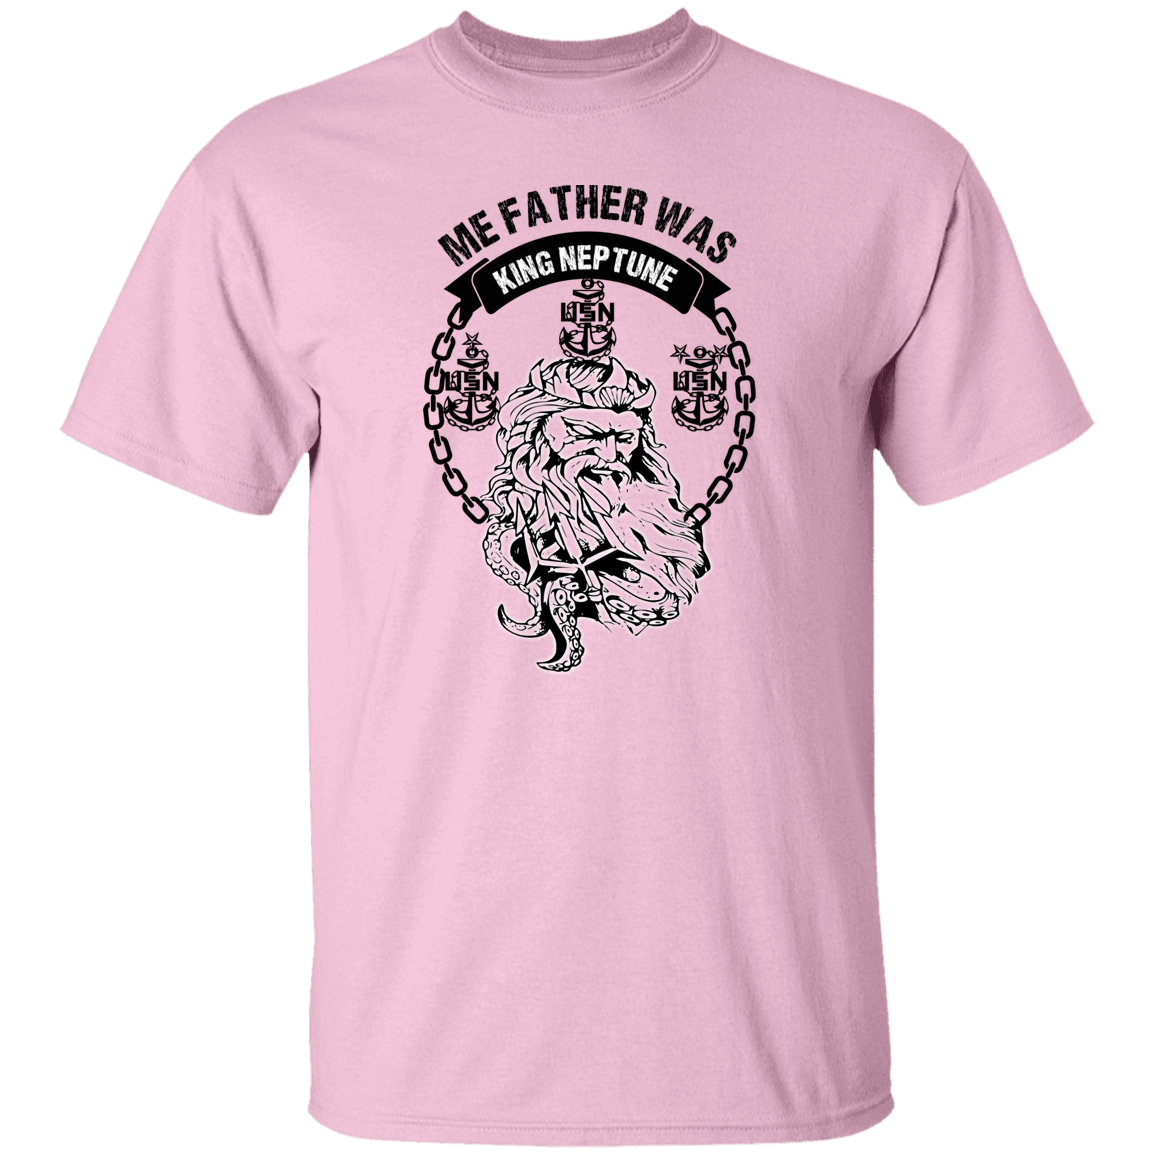 Me Father was King Neptune5.3 oz. T-Shirt